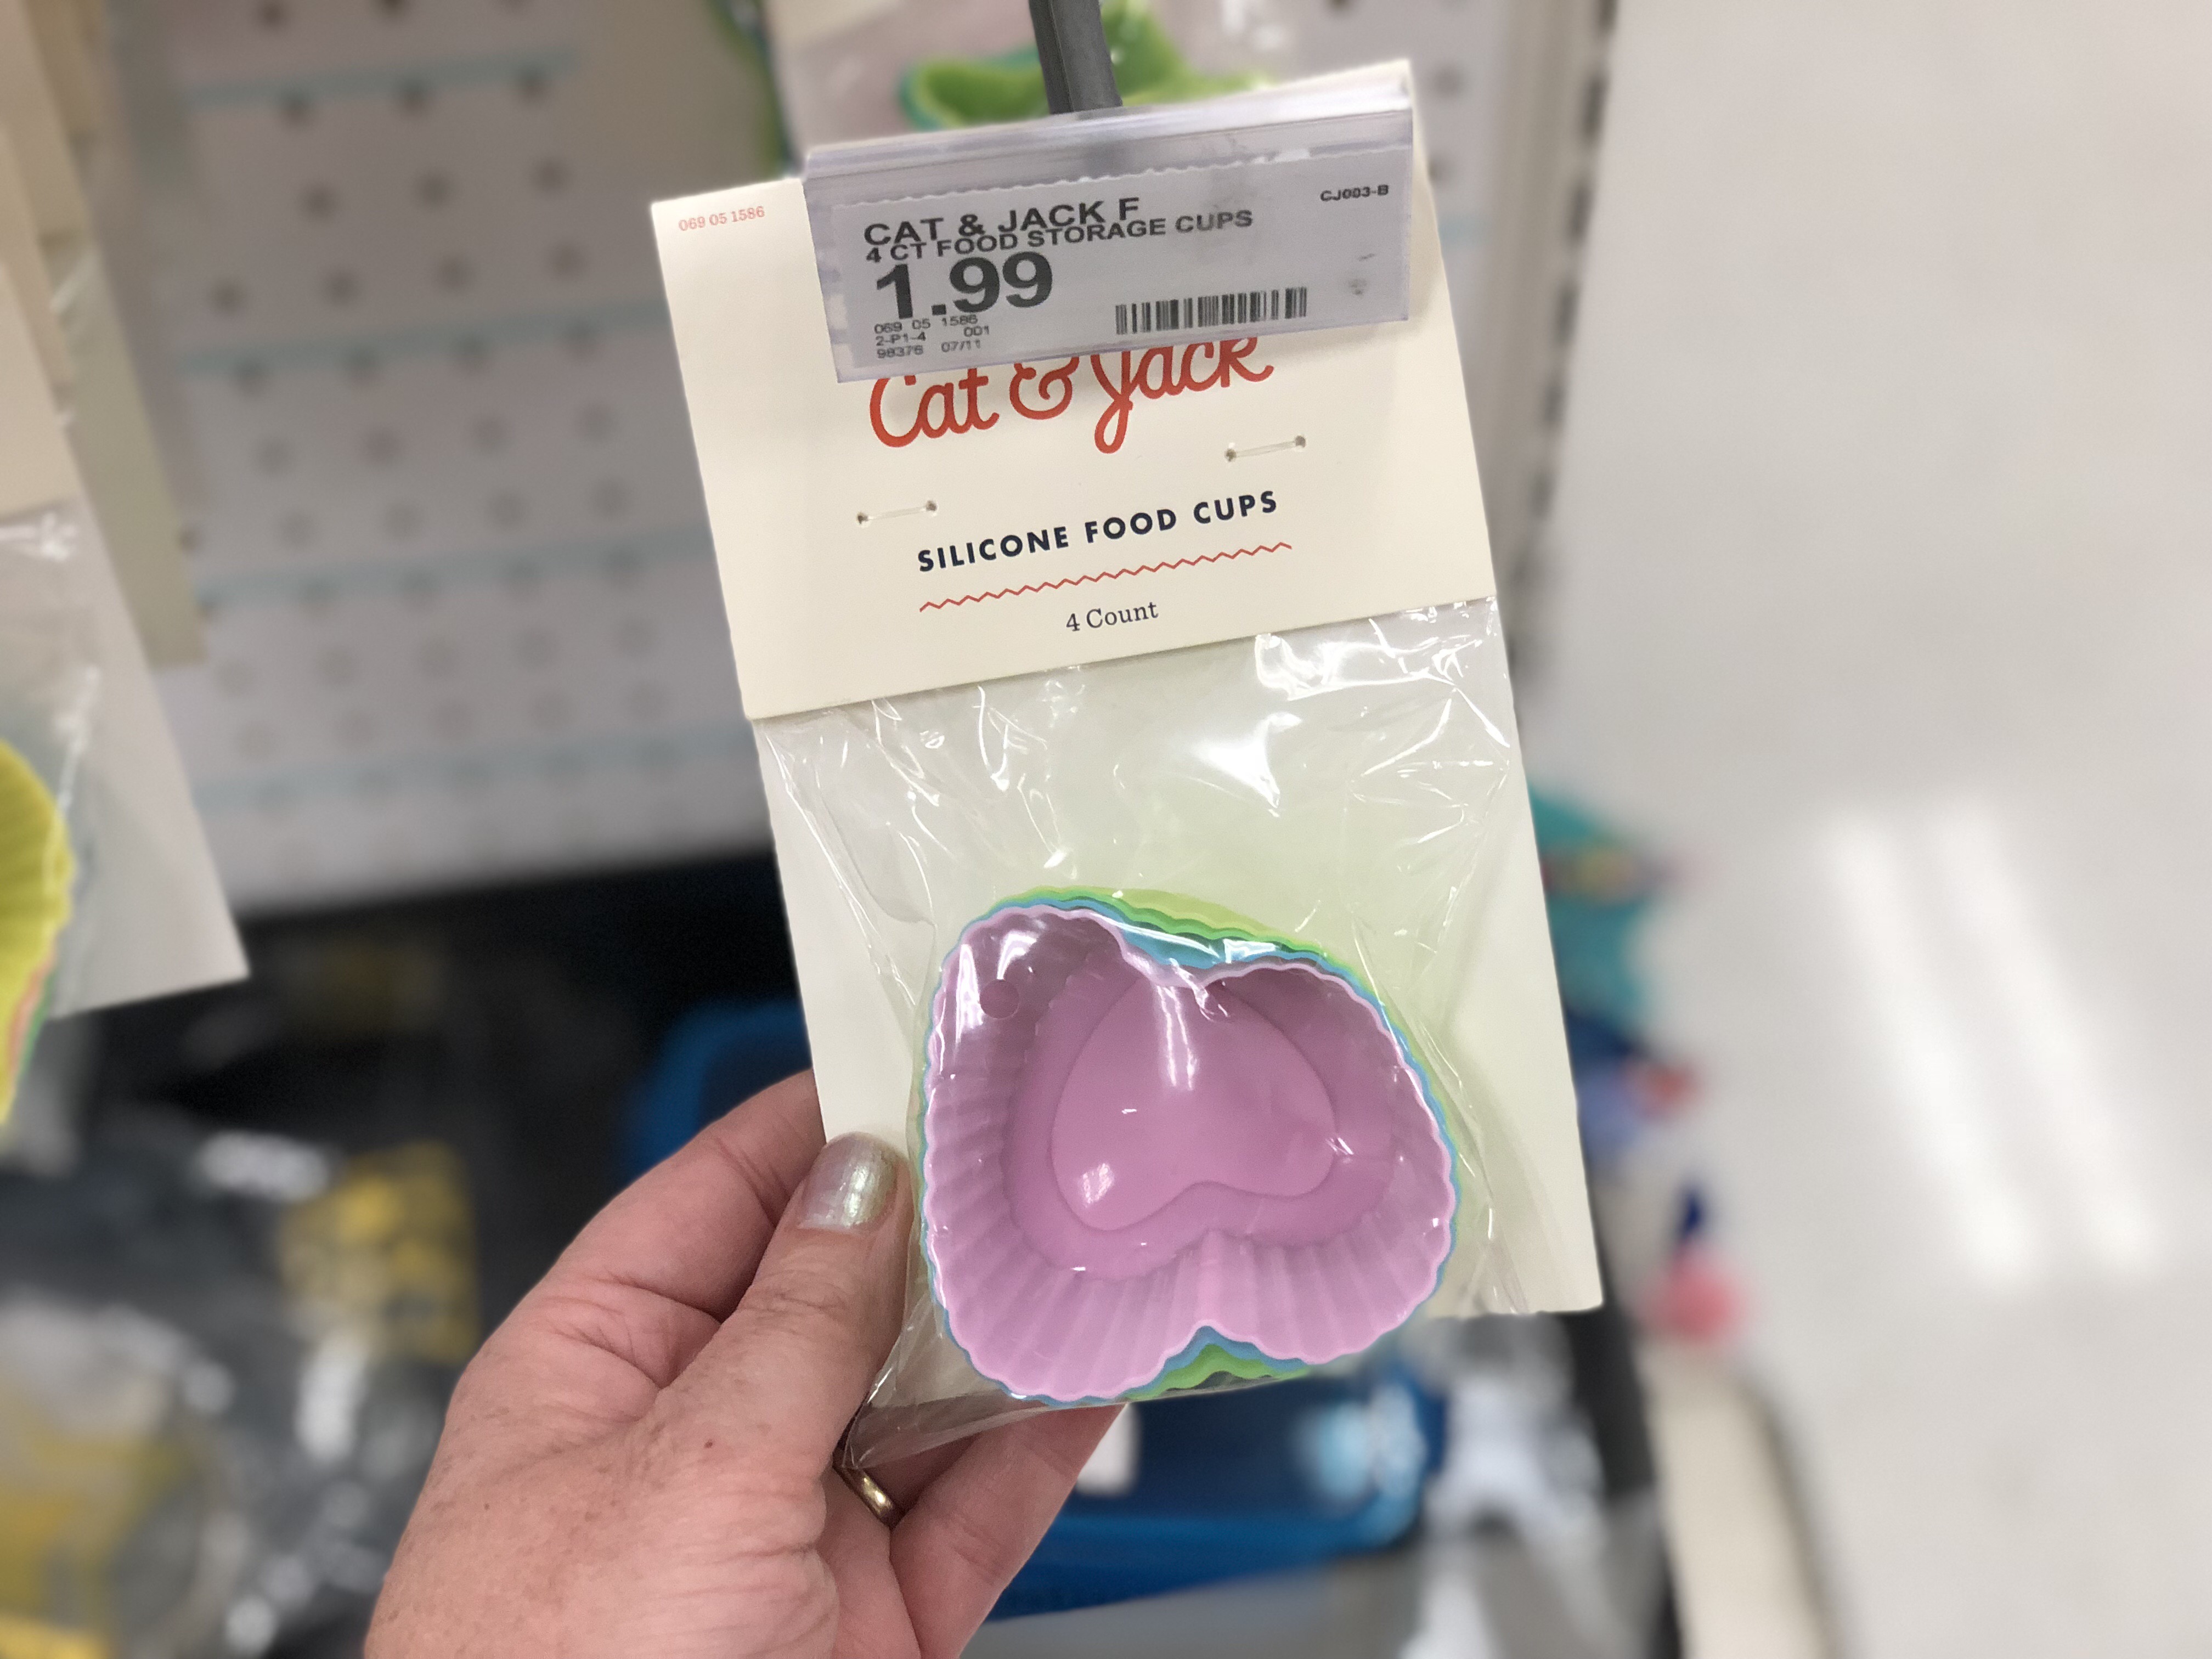 Cat & Jack Bento Box items at Target make lunches fun - Cat & Jack food cups